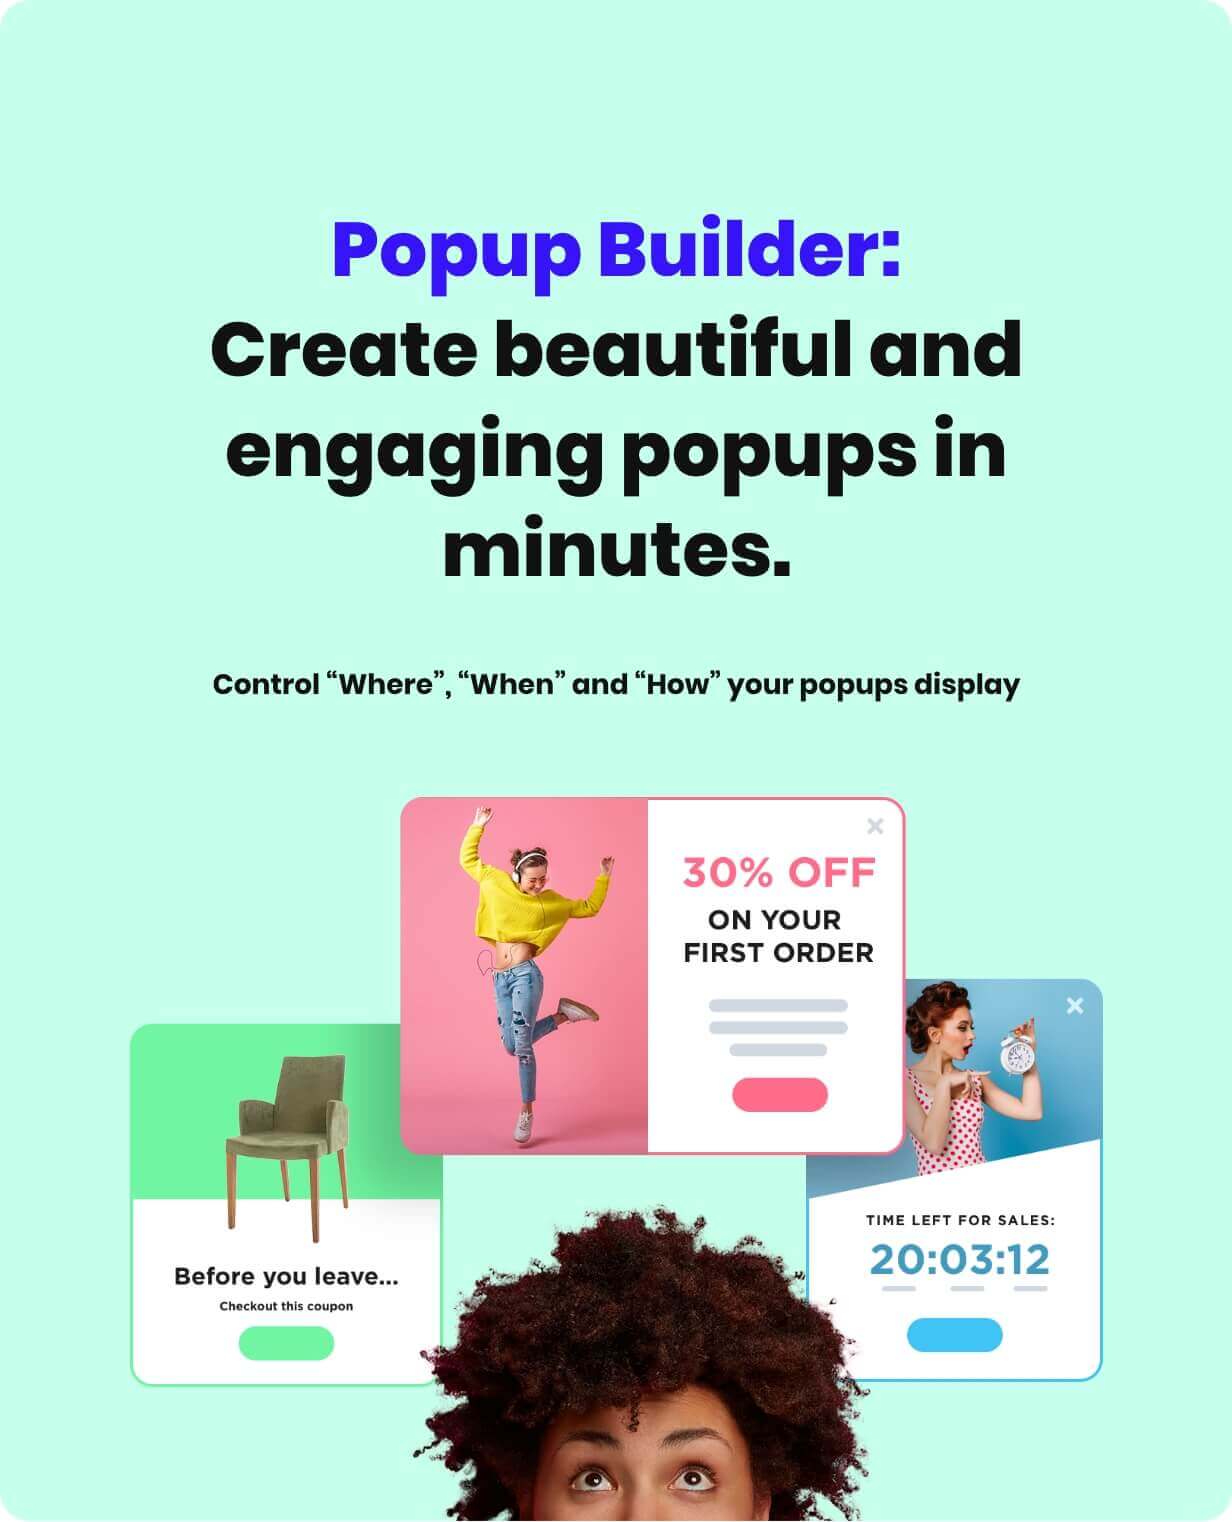 Create beautiful and engaging popups in minutes.